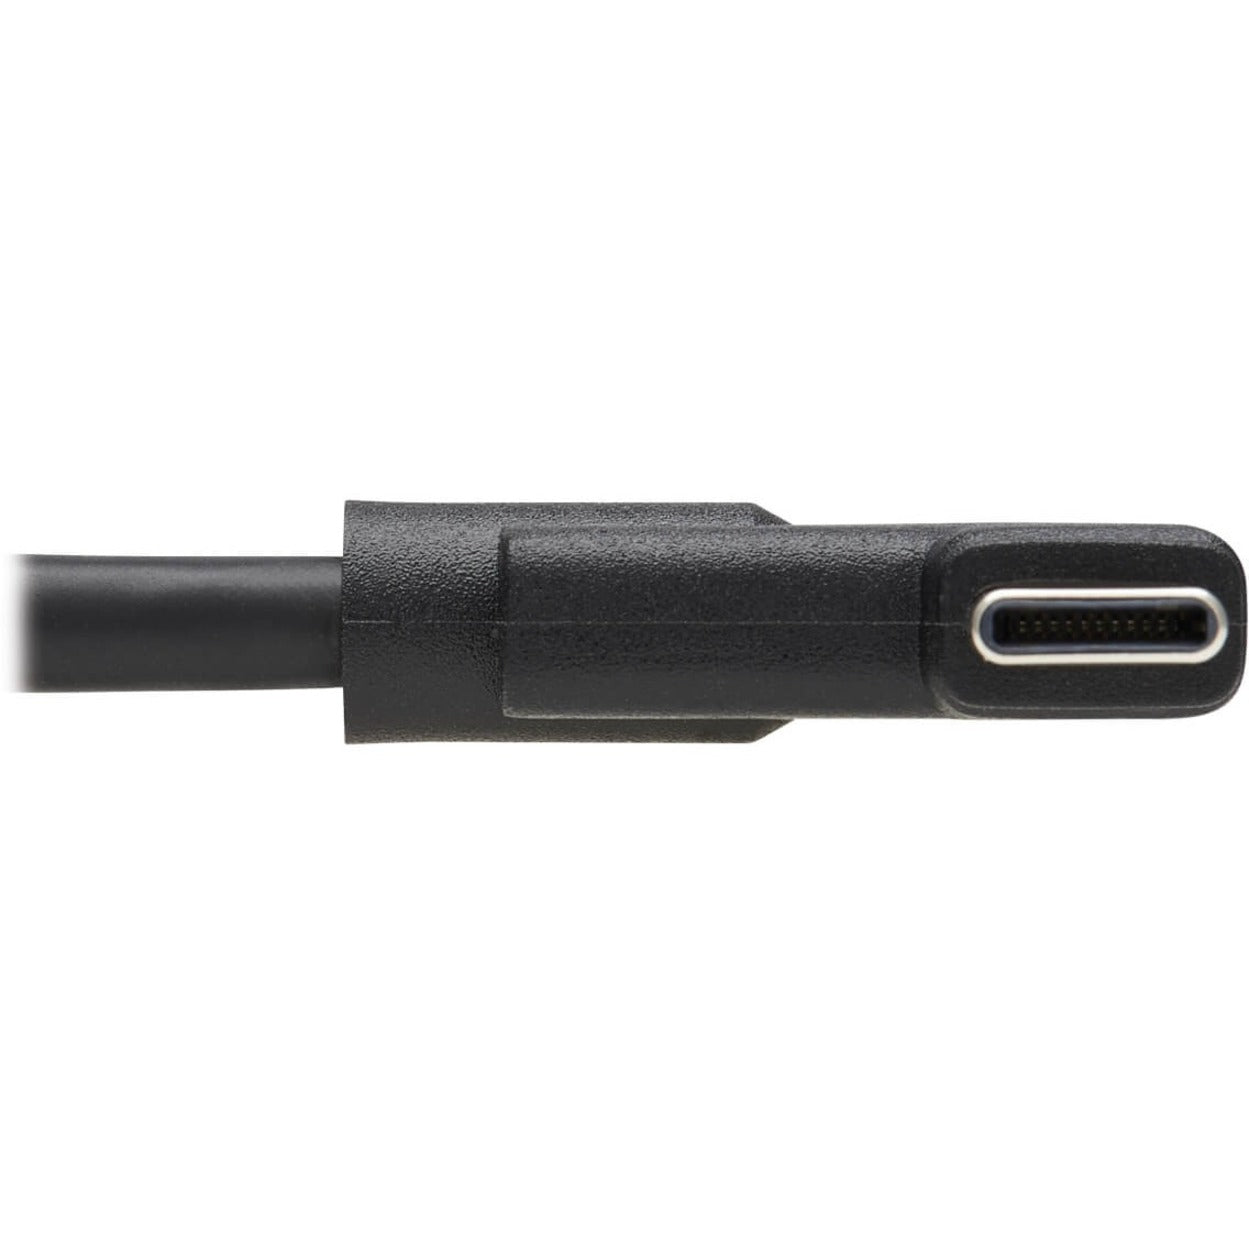 Tripp Lite U420-01M-RA USB-C to USB-C Cable, M/M, Black, 1 m (3.3 ft.), Right-Angled Connector, USB Power Delivery (USB PD), Charging